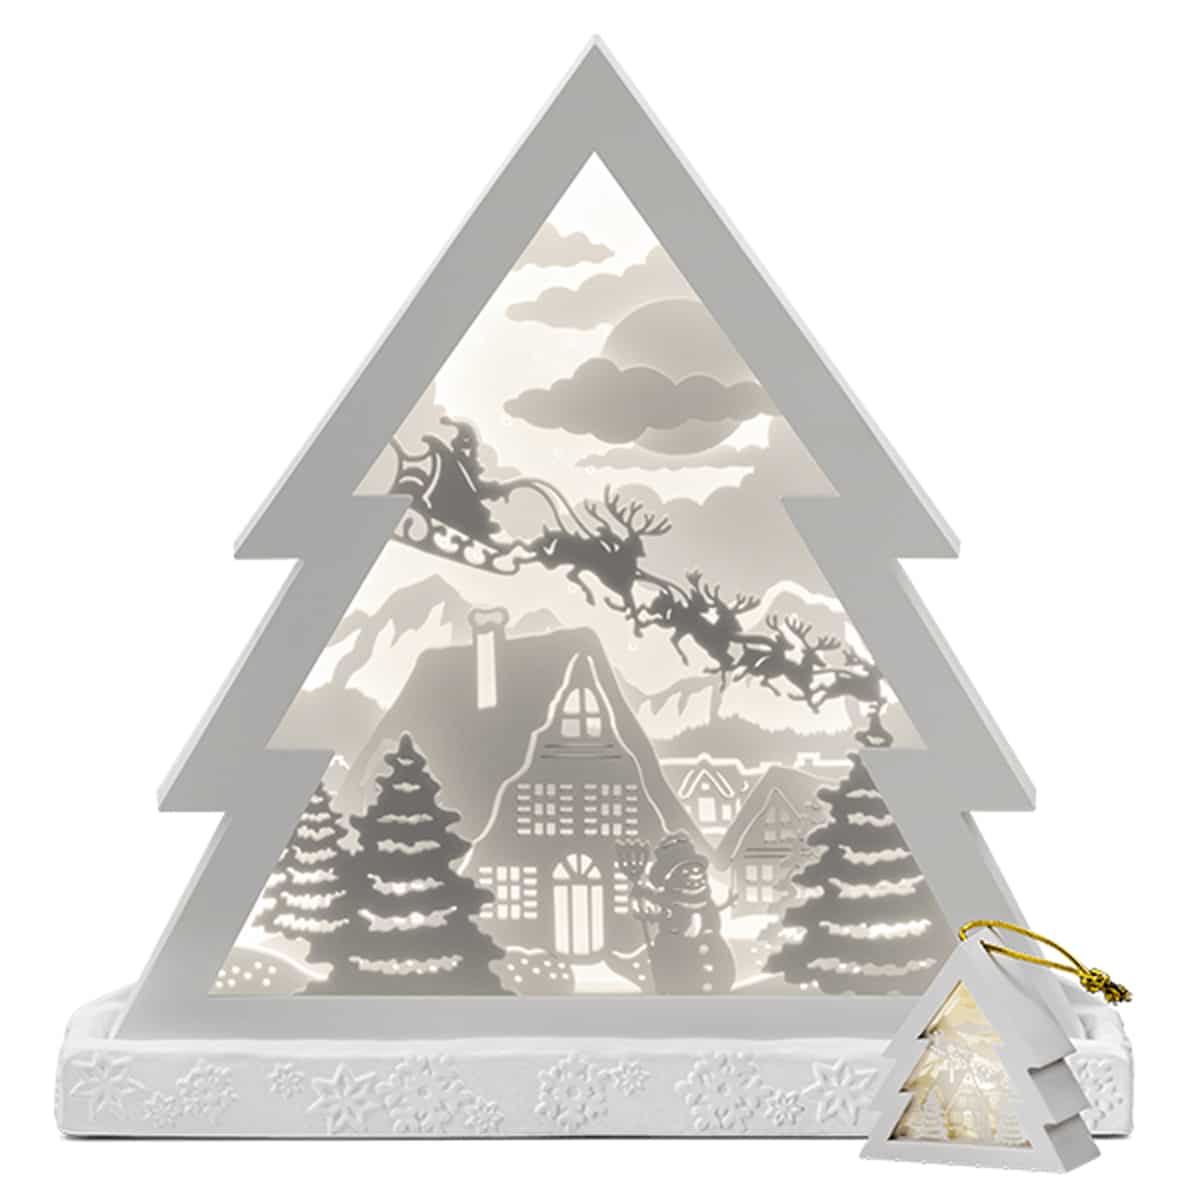 All Through the Night Scentsy Limited-Edition Holiday Warmer